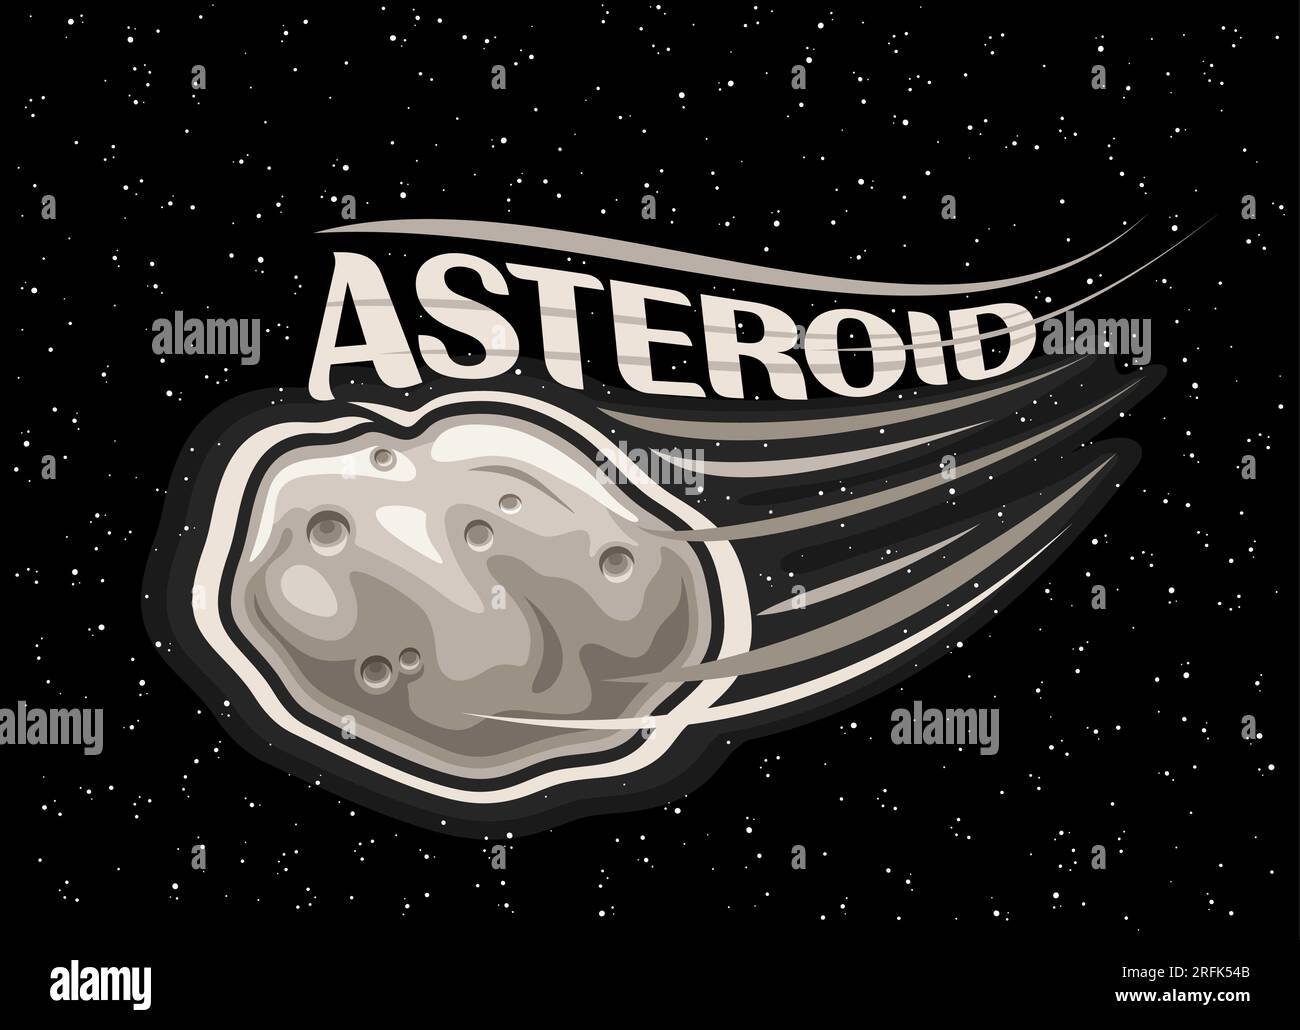 Vector illustration of Asteroid, horizontal astronomical poster with shooting rock asteroid, line art cosmo print with futuristic meteor in deep space Stock Vector